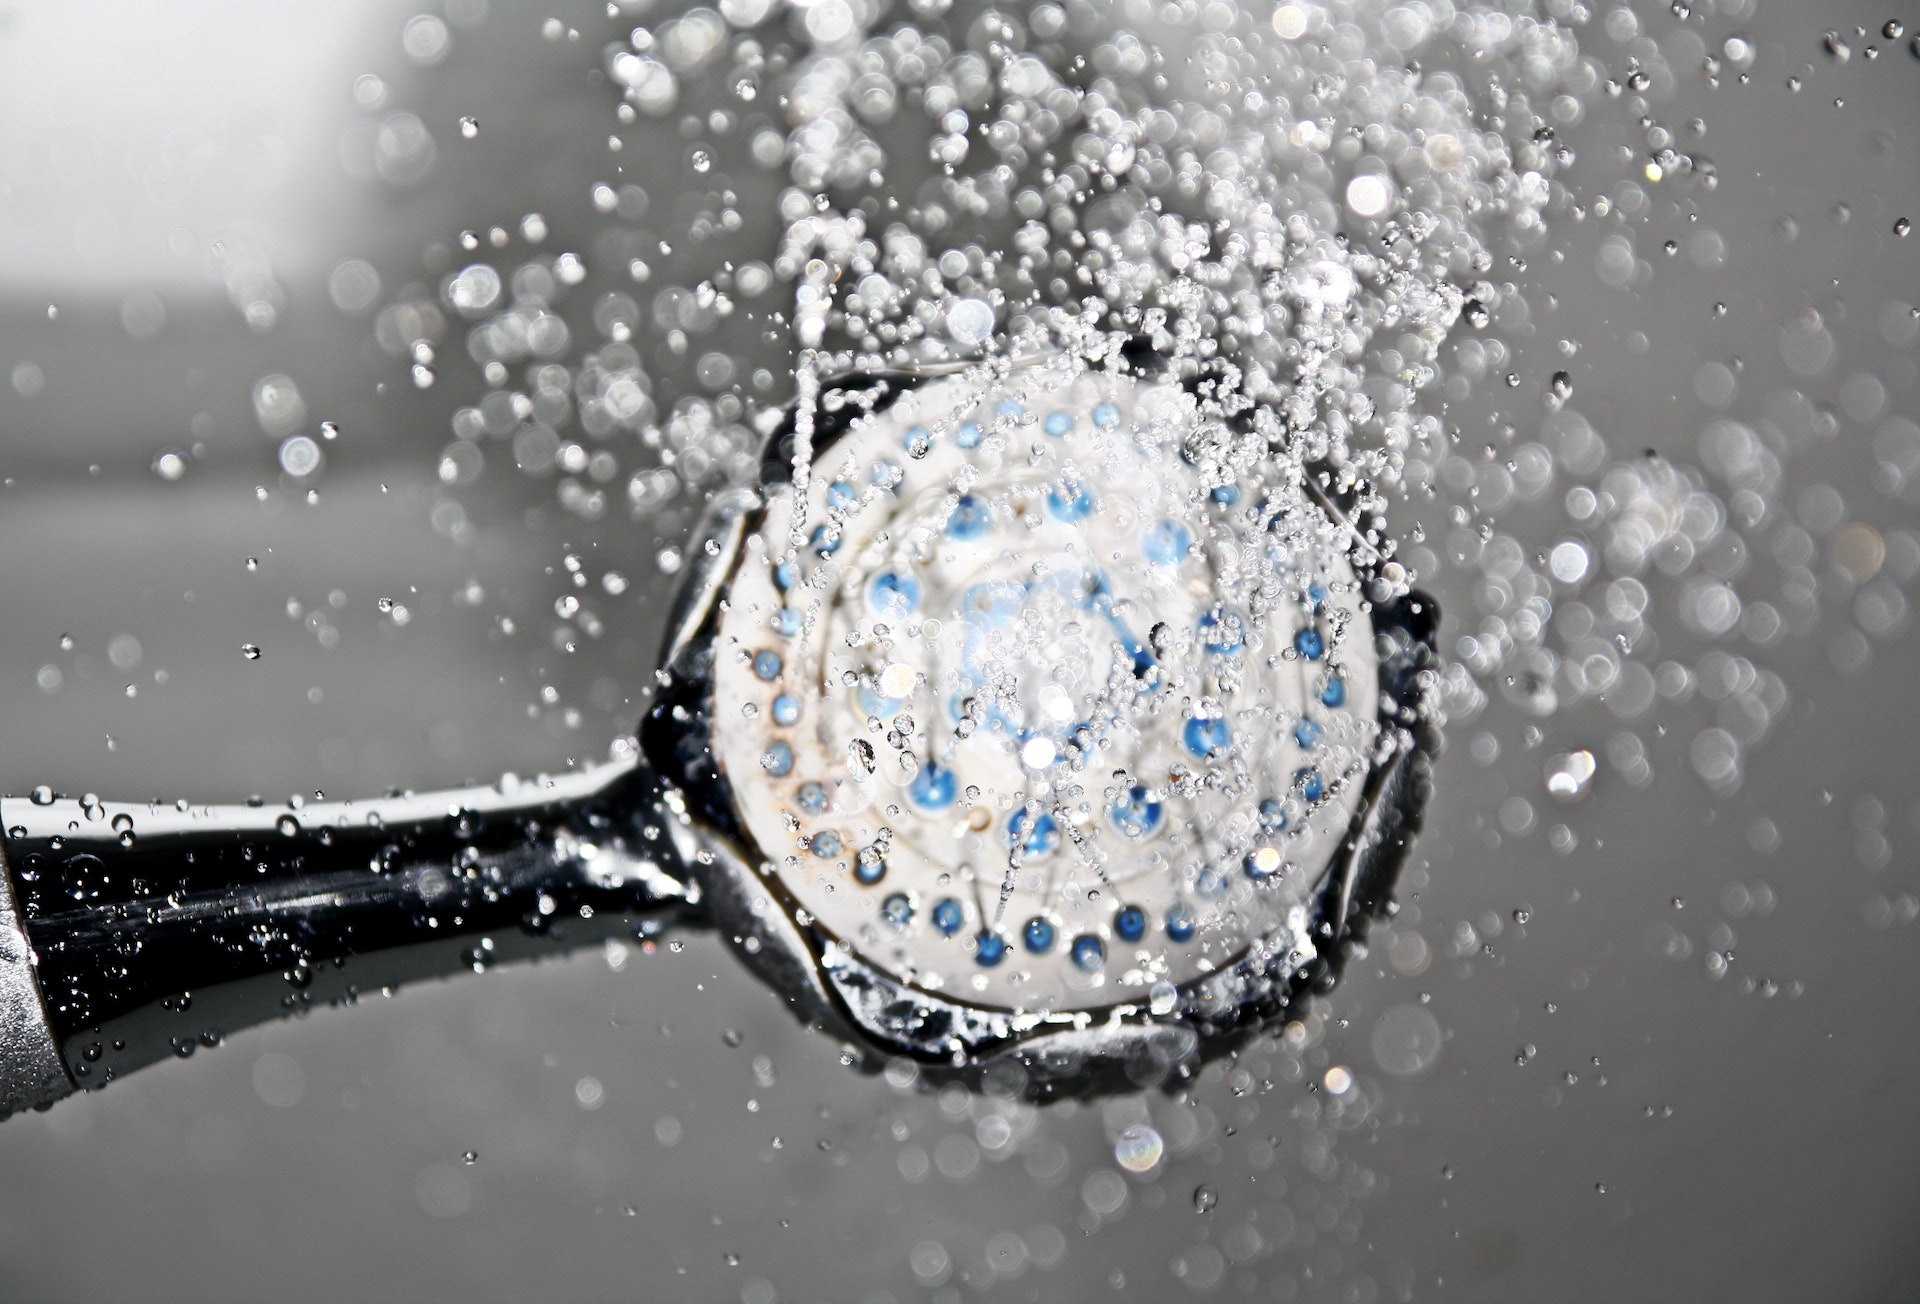 Shower head with droplets of water coming out of it